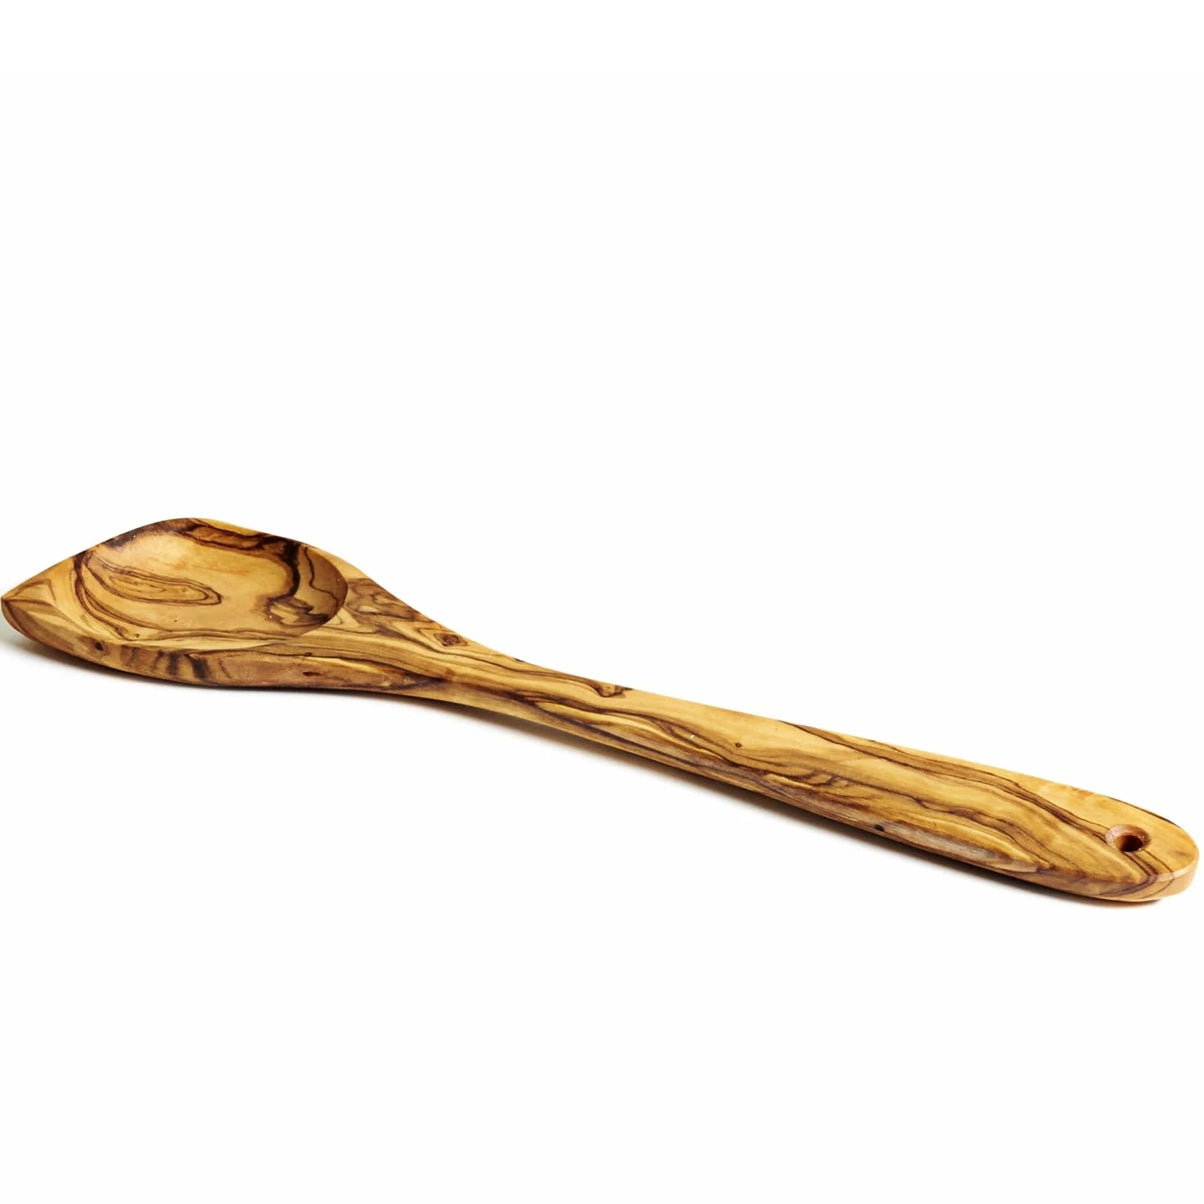 Olivewood Rustic Cooking Spoon